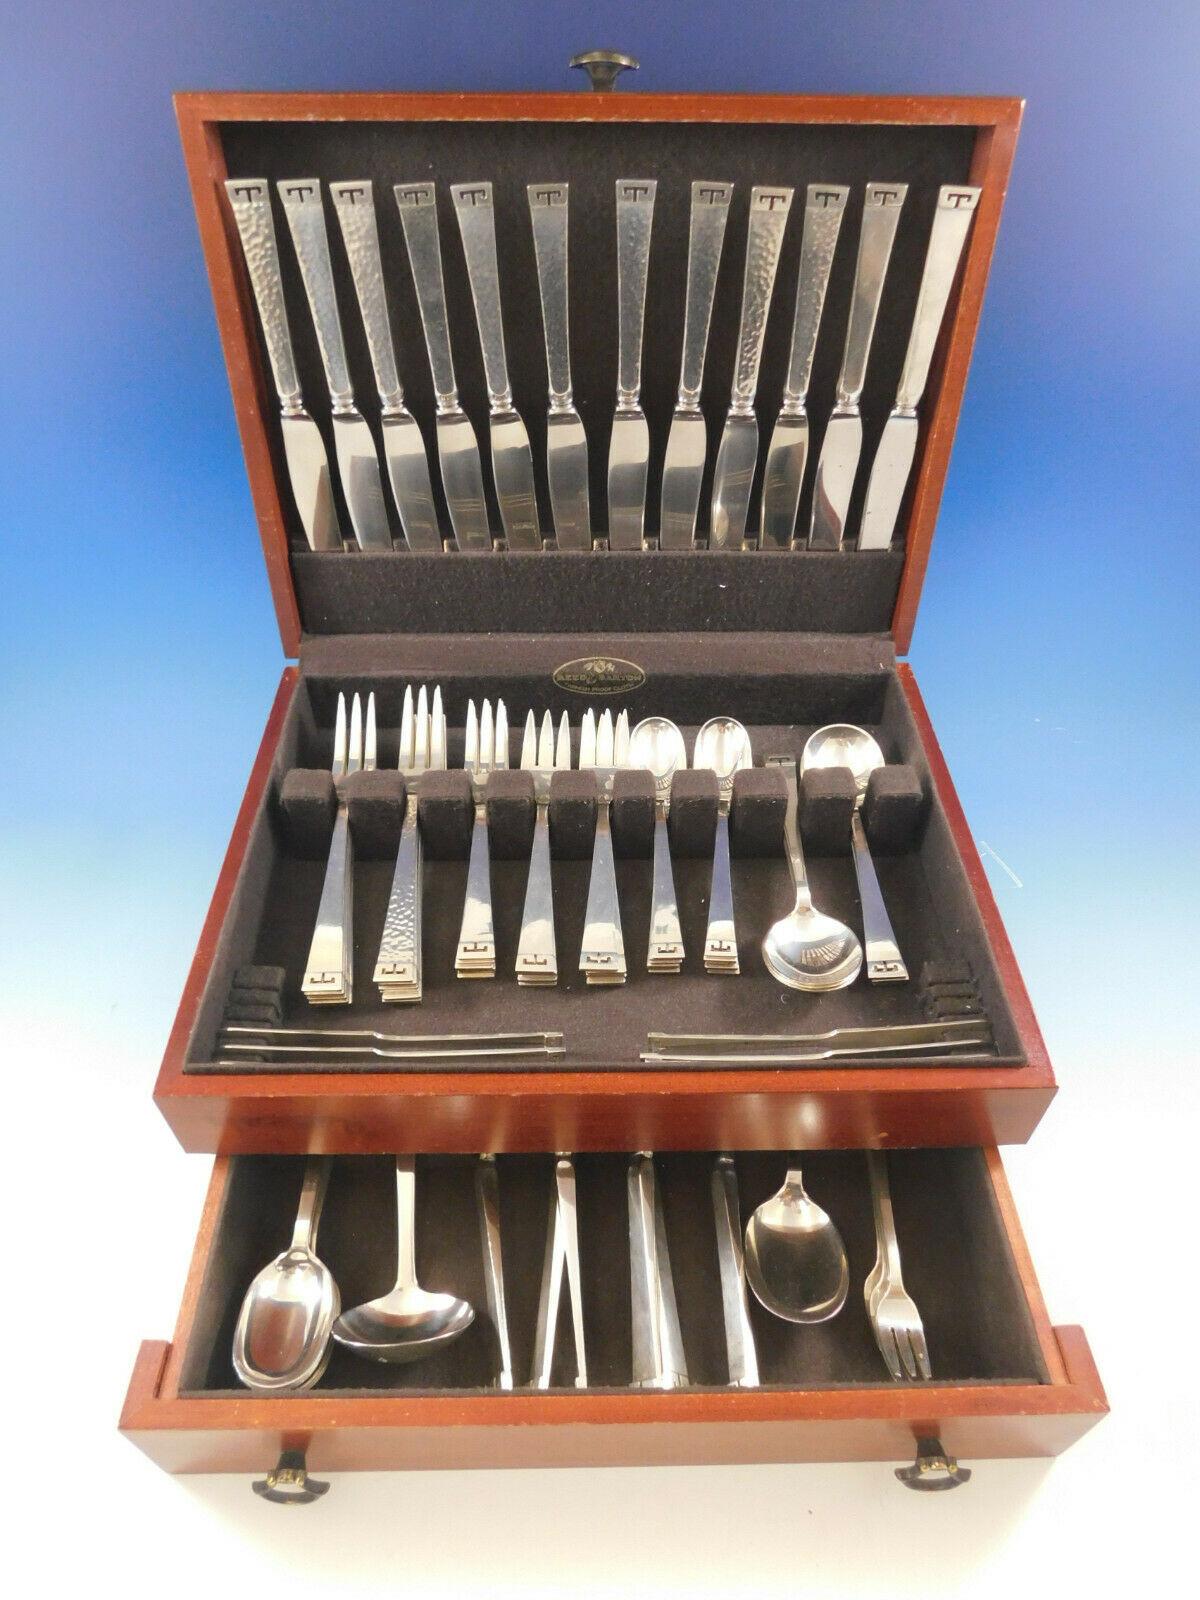 Dinner size Chinese Key by Allan Adler sterling silver flatware set, 80 pieces. This set includes:

12 dinner size knives with innovative solid handles, 9 5/8